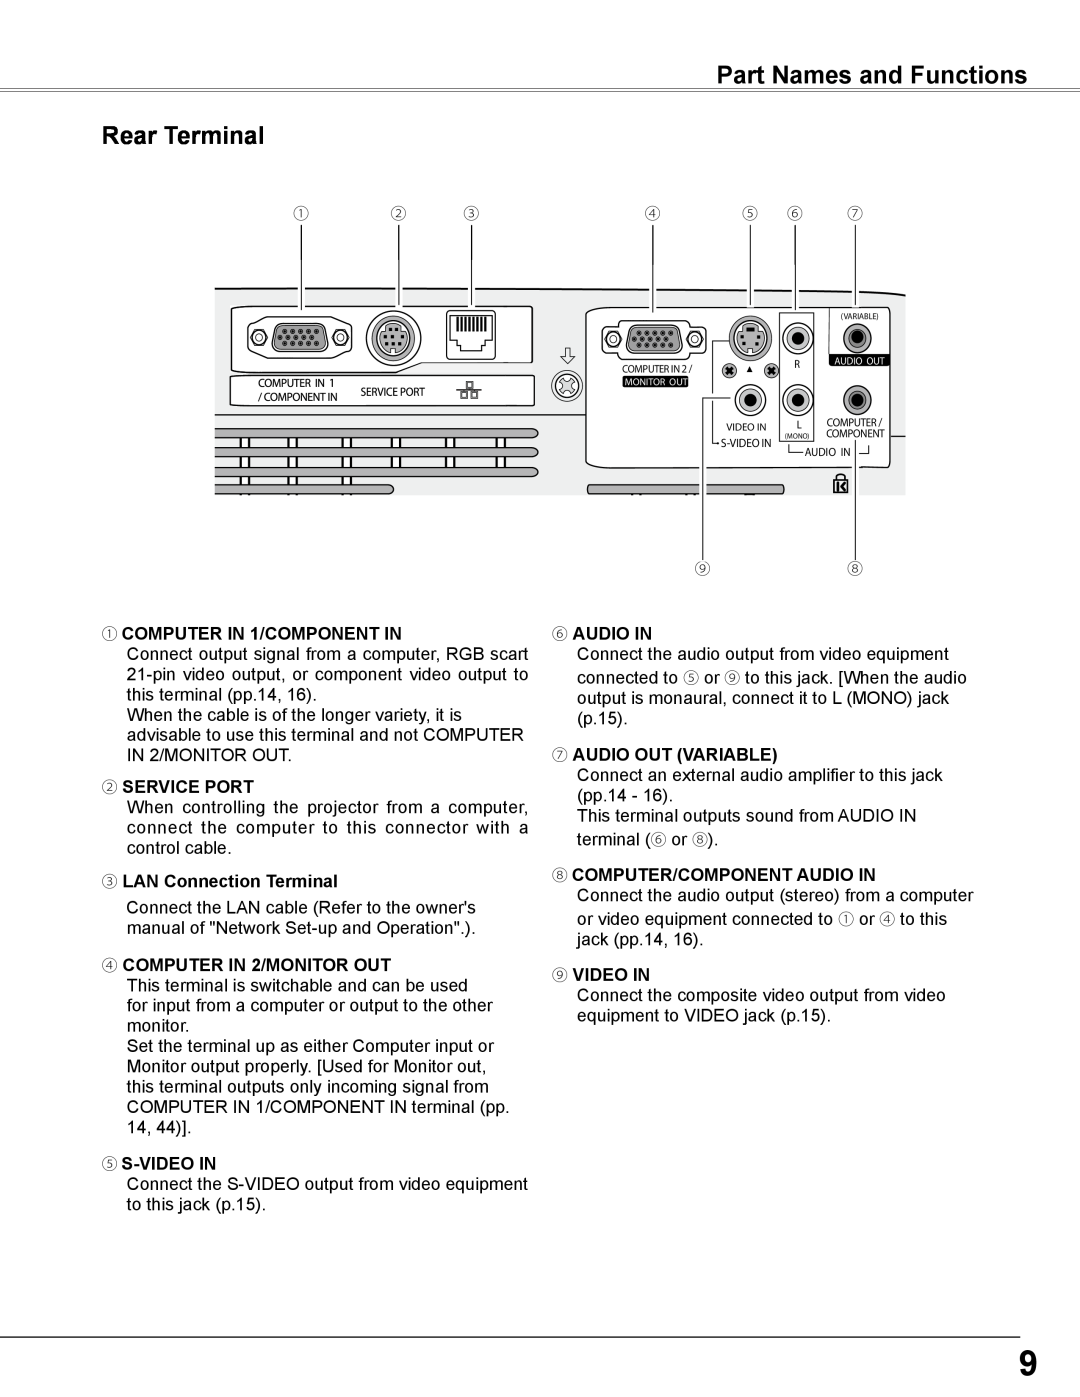 Sanyo PLC-WXE46 Part Names and Functions Rear Terminal, ① COMPUTER IN 1/COMPONENT IN, ② SERVICE PORT, ⑤ S-VIDEO IN 